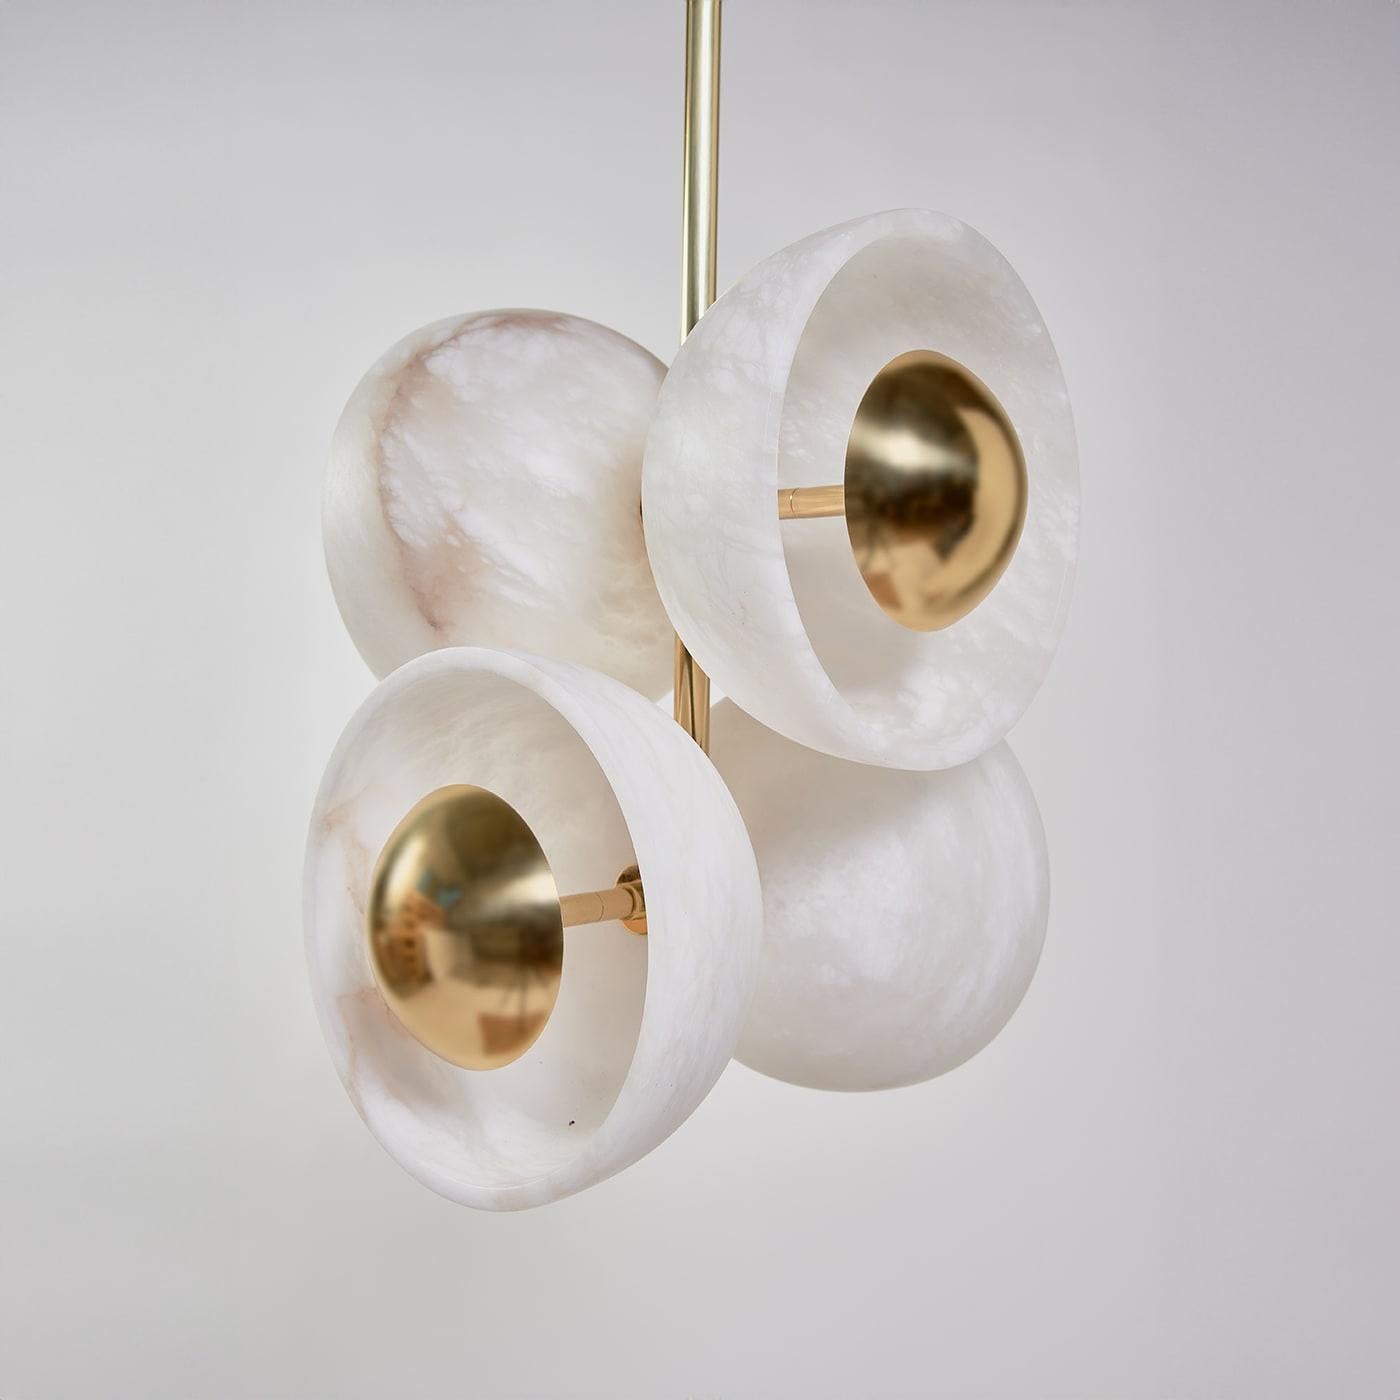 Inspired by a couple of flying butterflies, this pendant lamp enchants with its four prized alabaster cups arranged in a cluster of striking sculptural flair. The romantic zoomorphic inspiration gets sealed by the streamlined polished brass